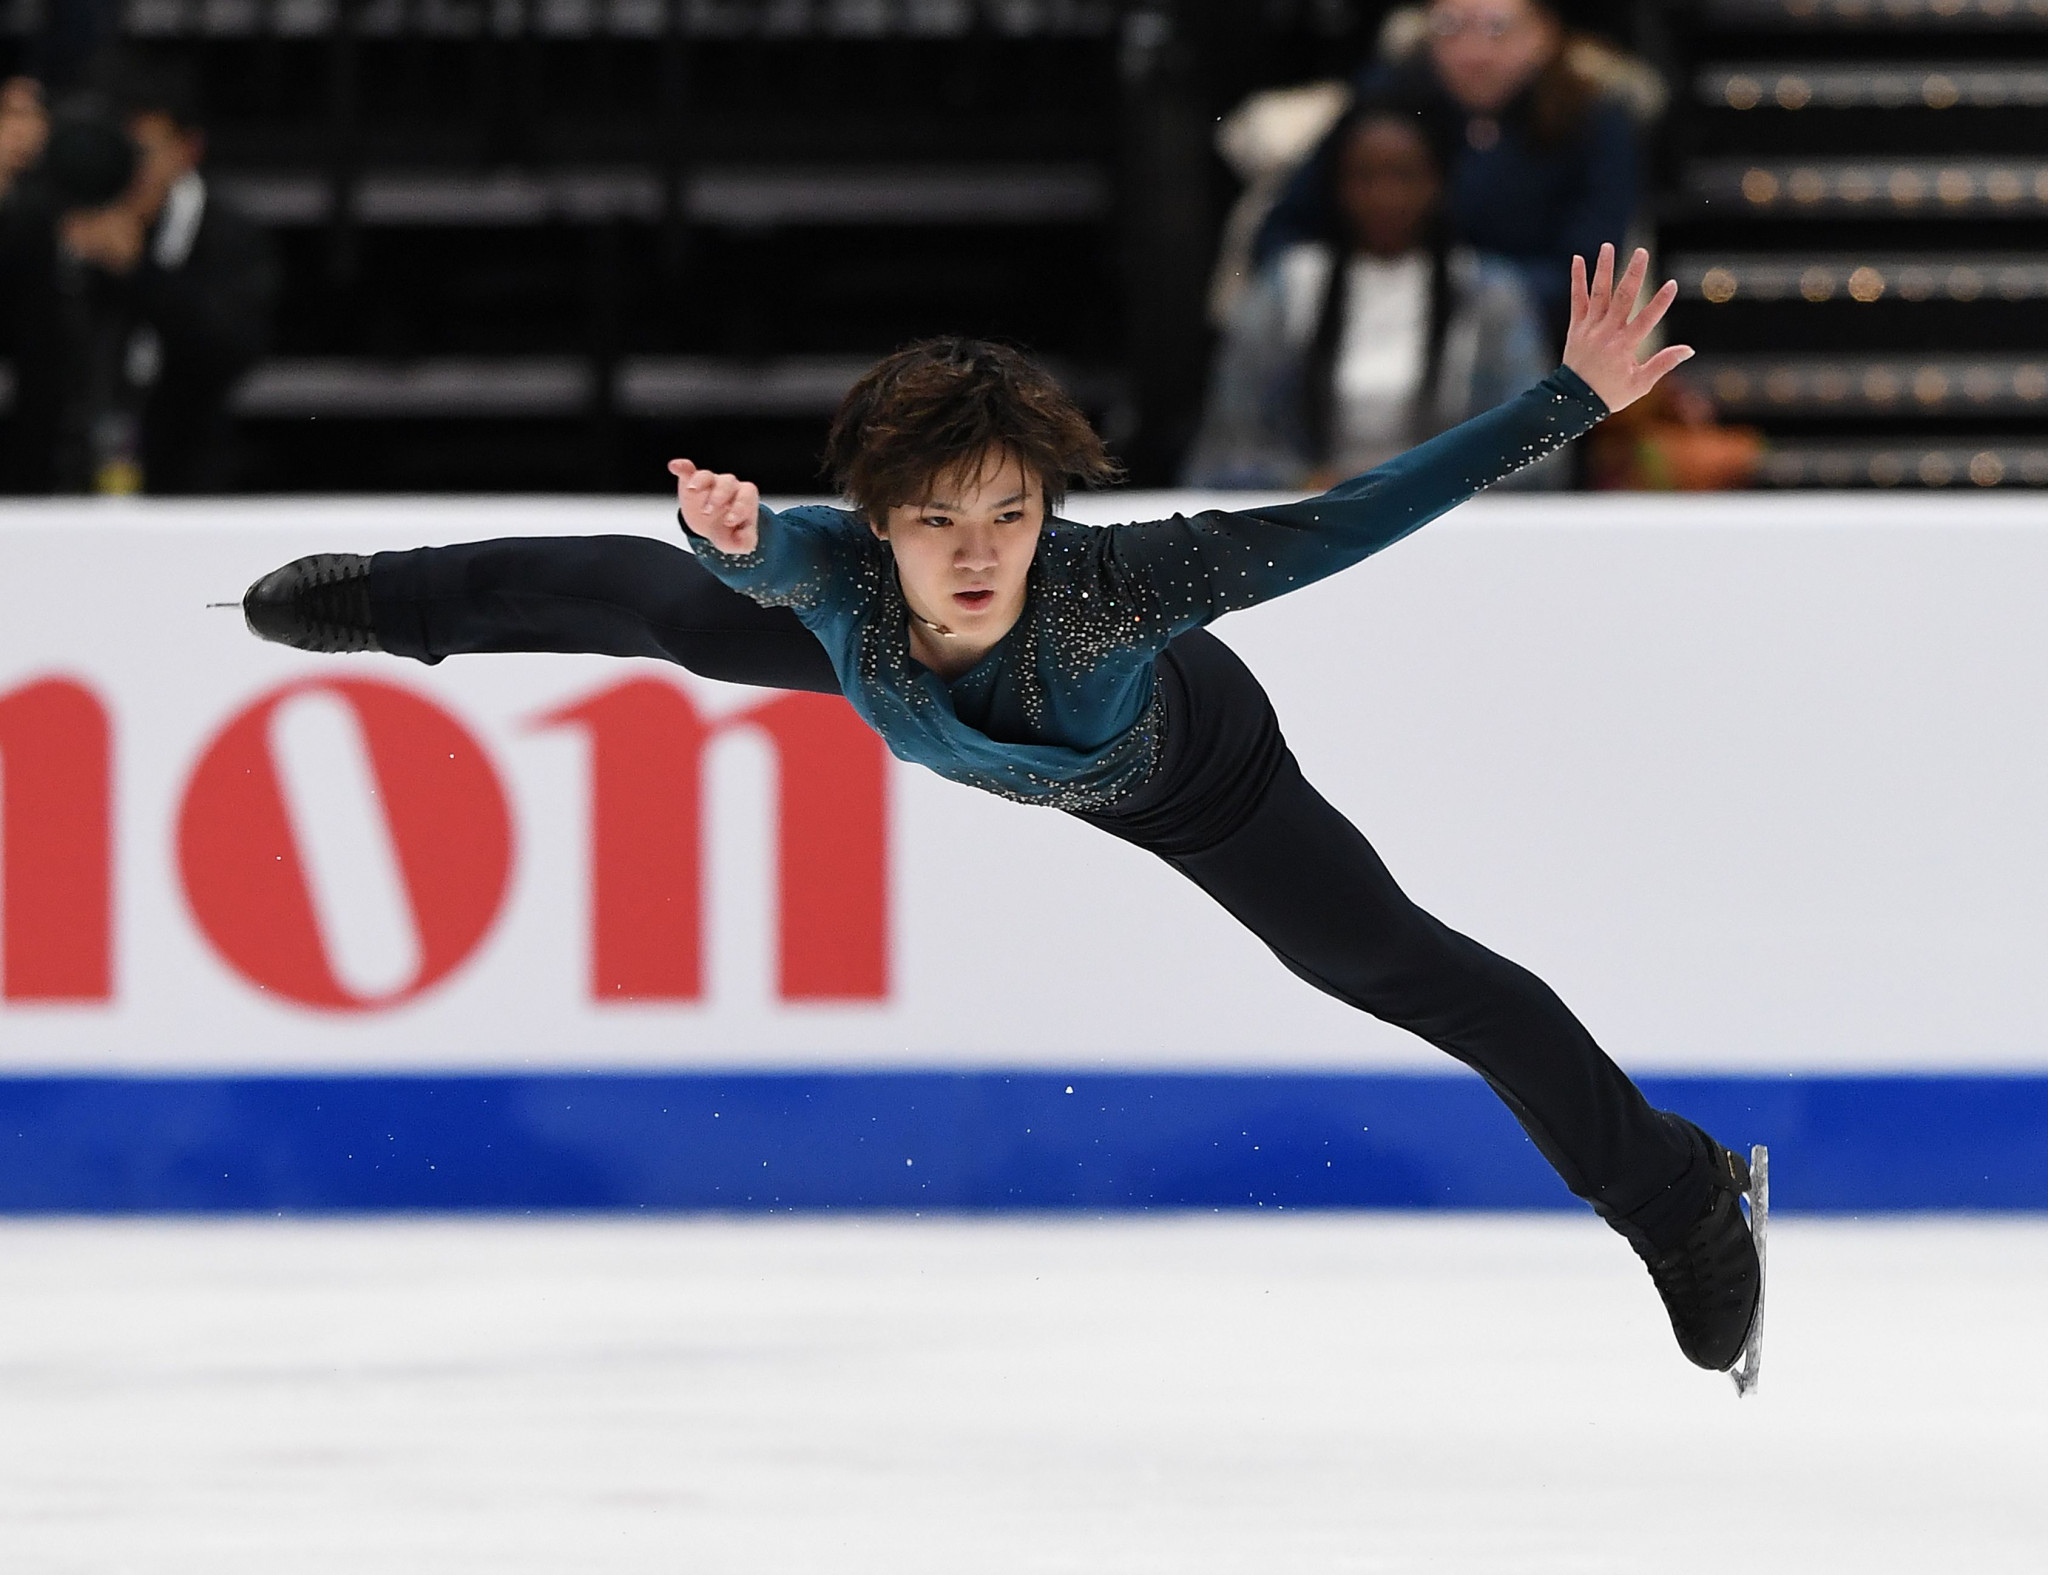 Uno wins men's title at ISU Four Continents Figure Skating Championships